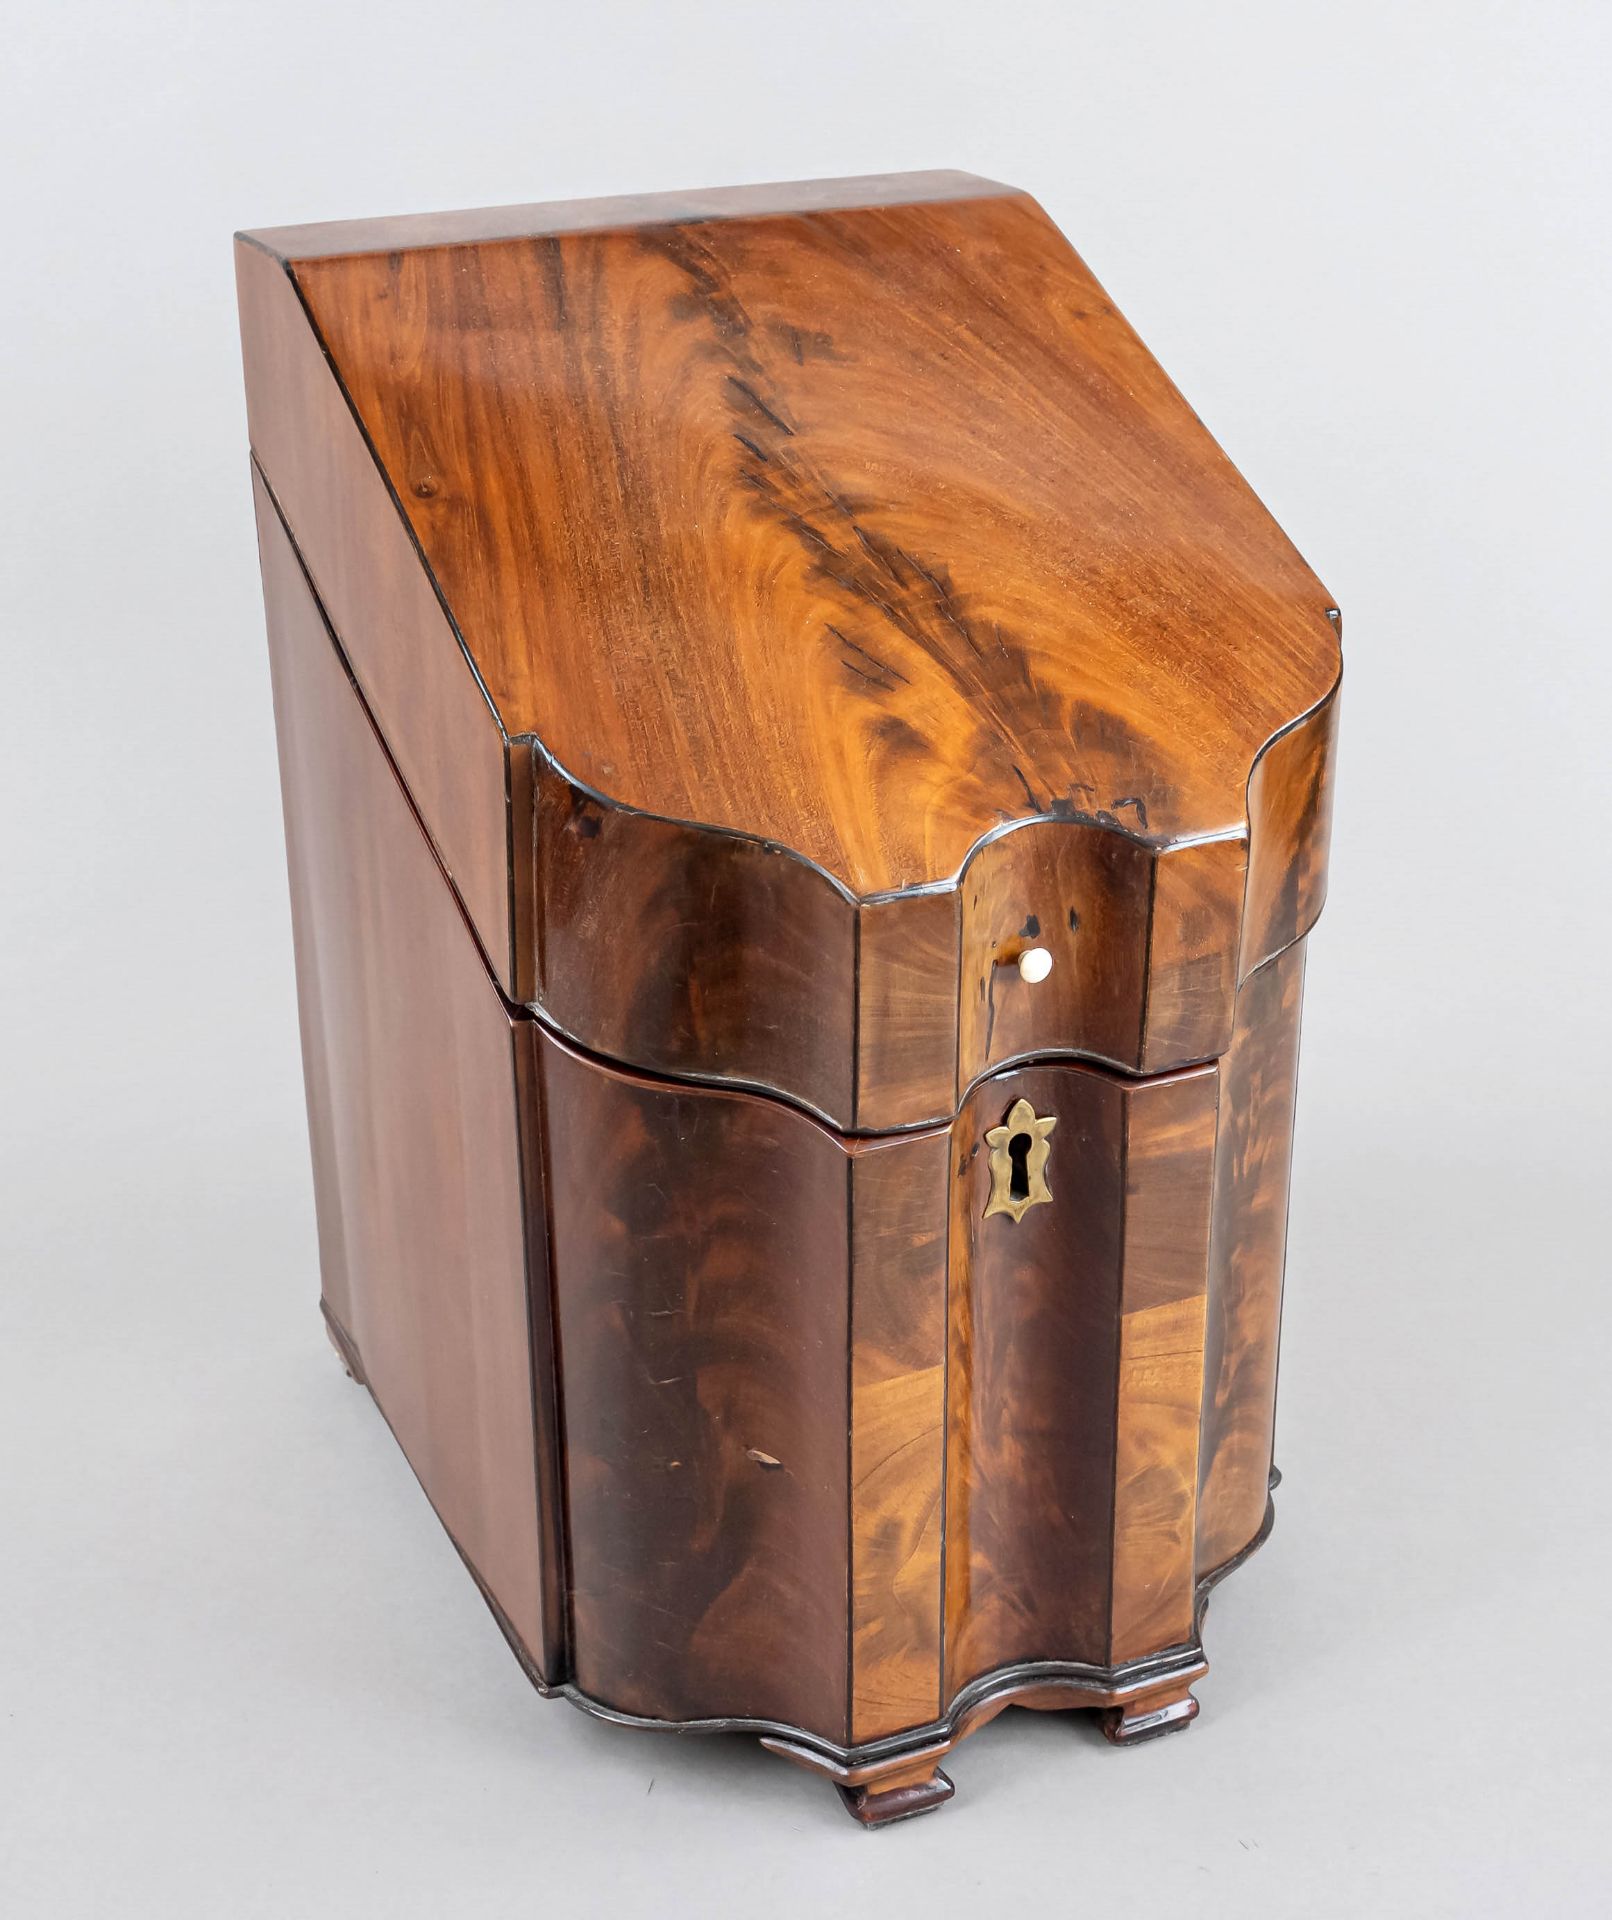 Cutlery box, England, early 19th c., mahogany veneer, on 4 feet, matching curved front, beveled - Image 2 of 2